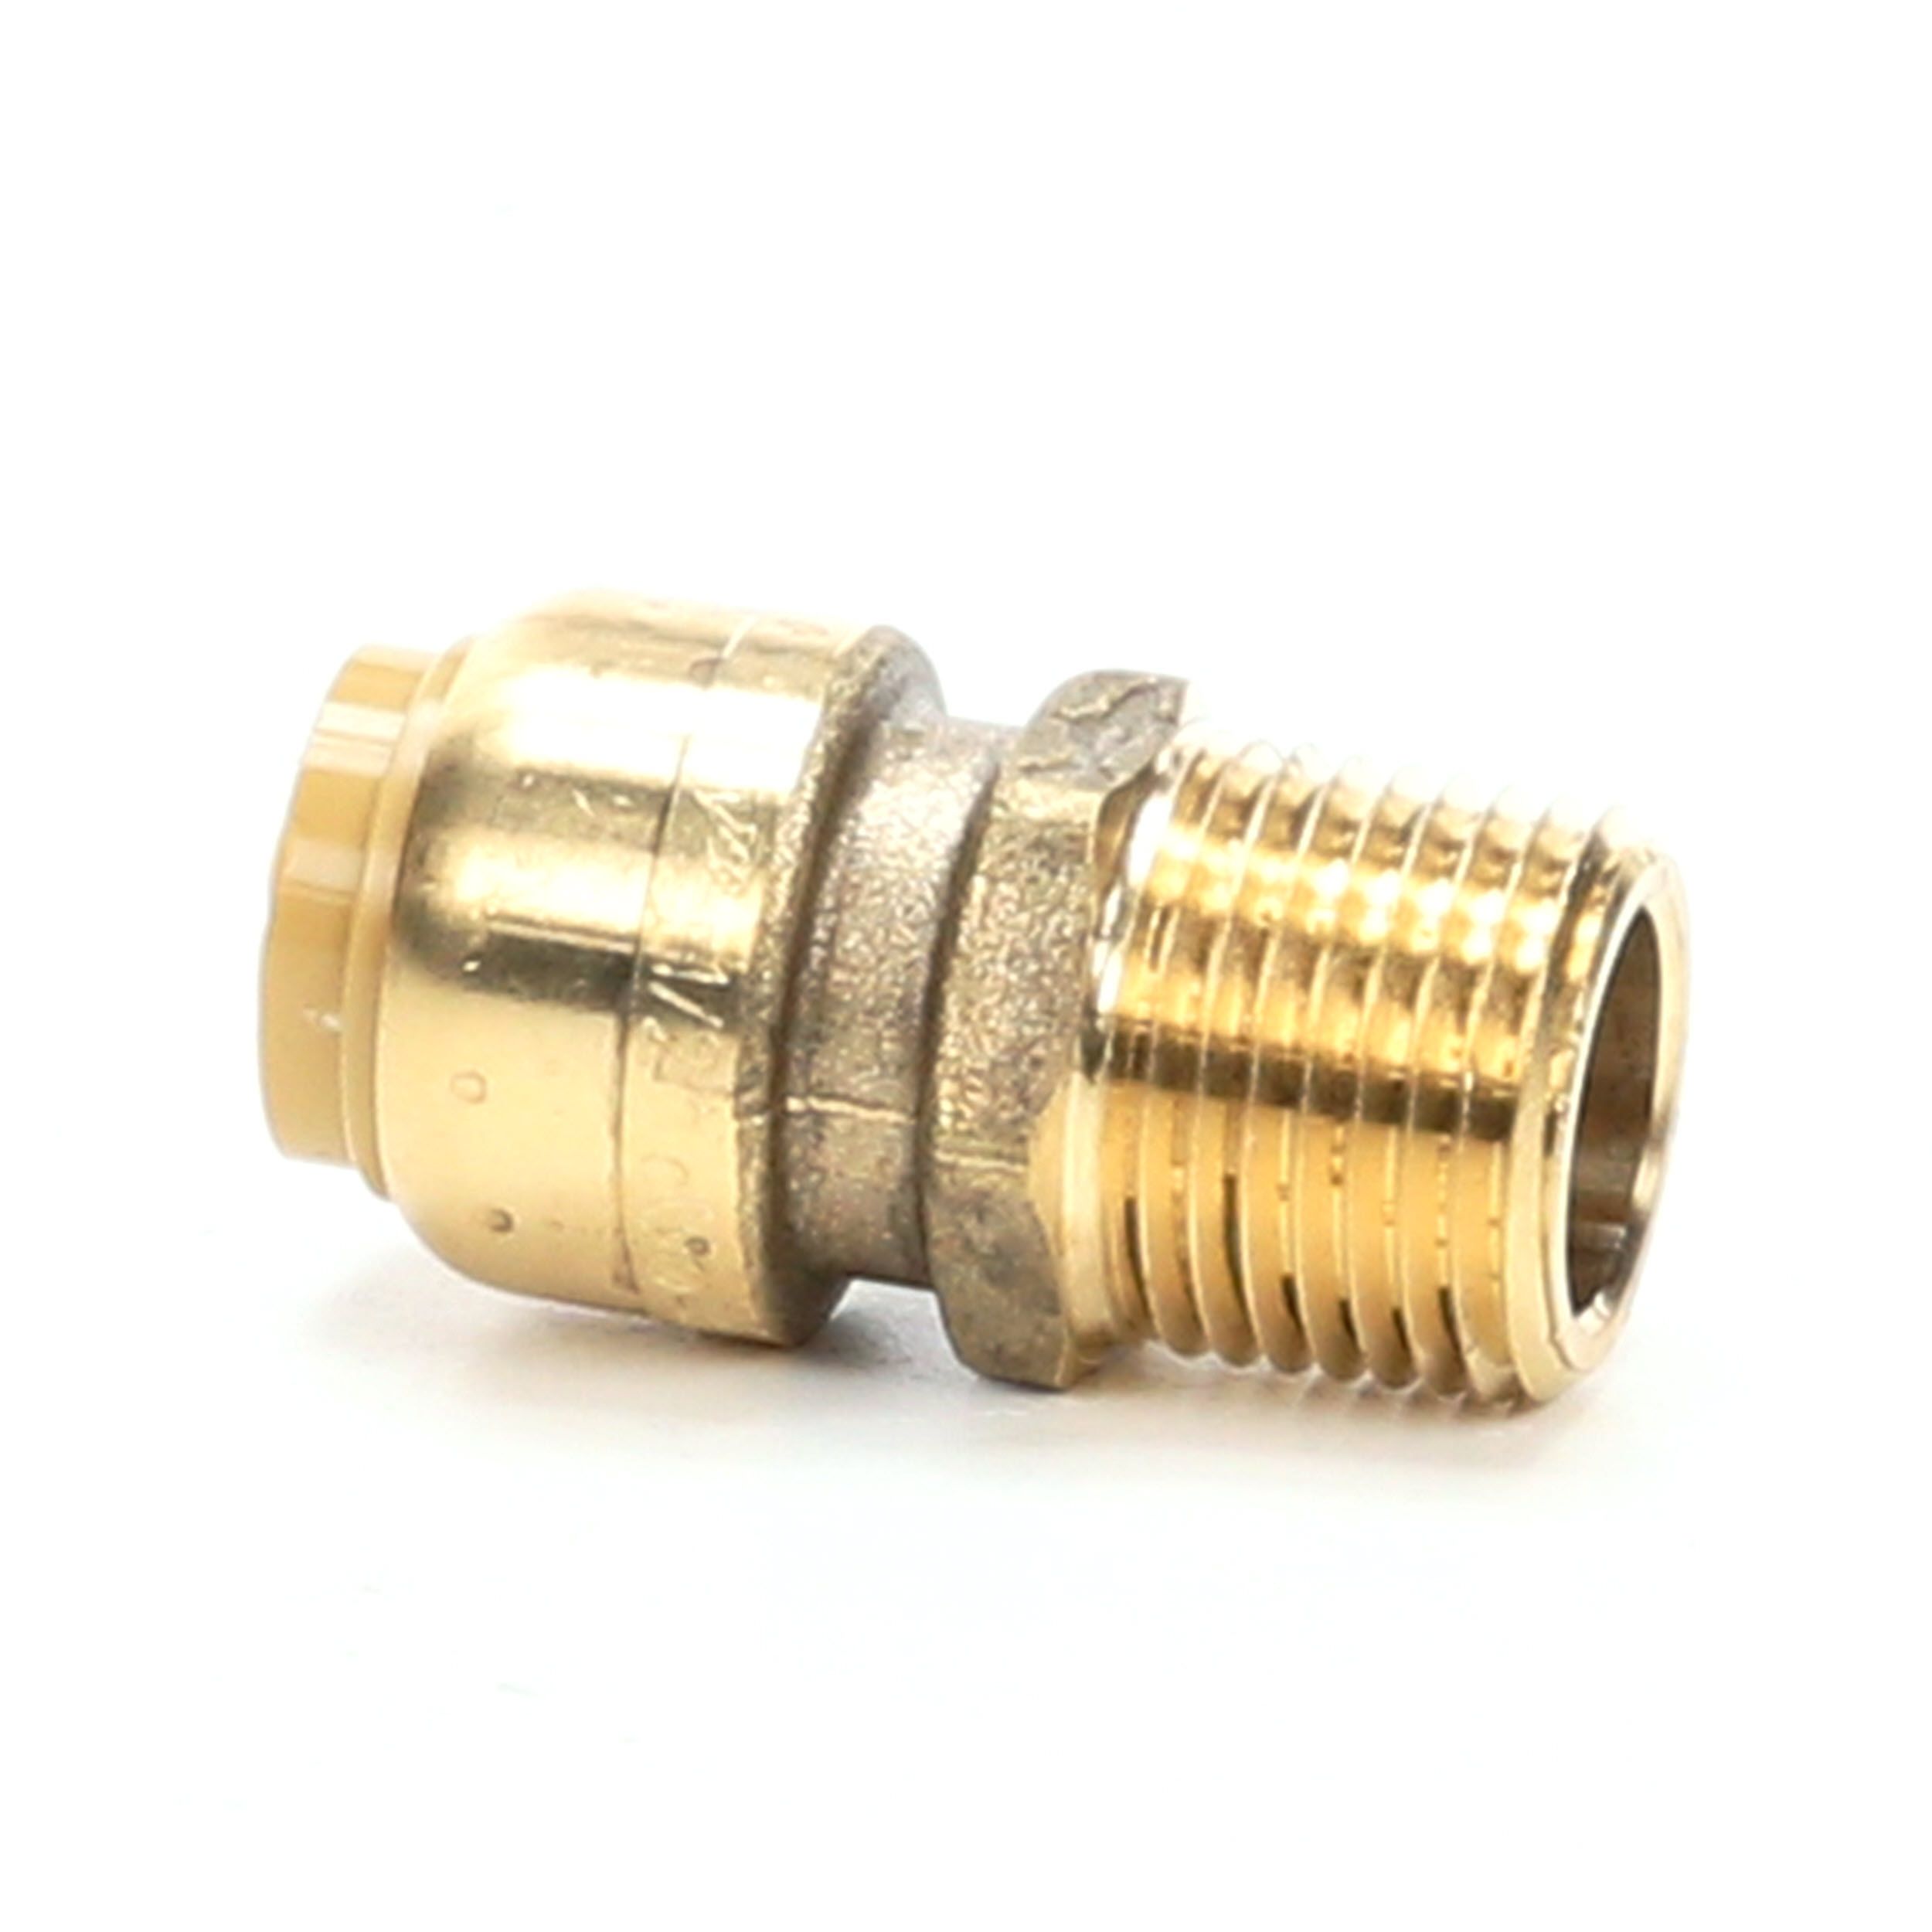 PACK OF 2 28mm x 1" Parallel Male Adapter 